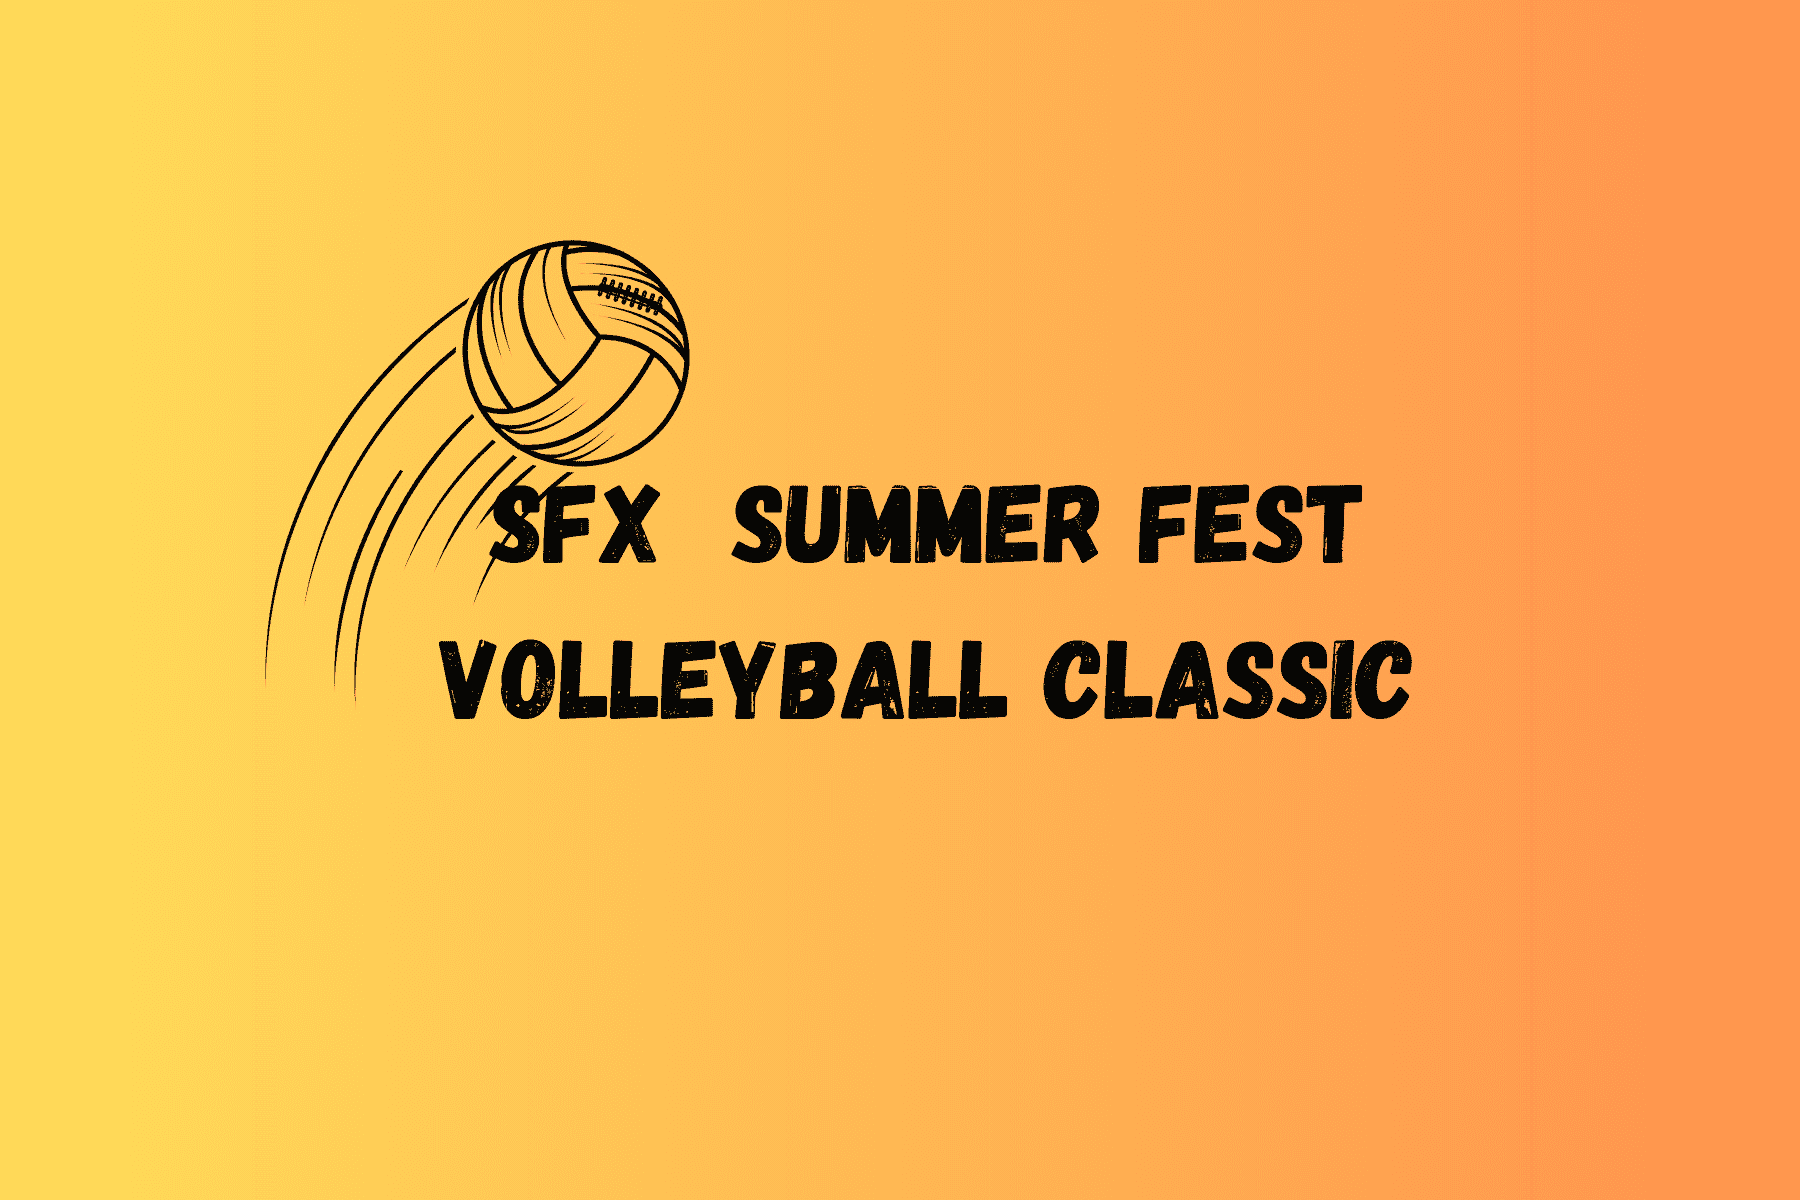 SFX Volleyball Classic